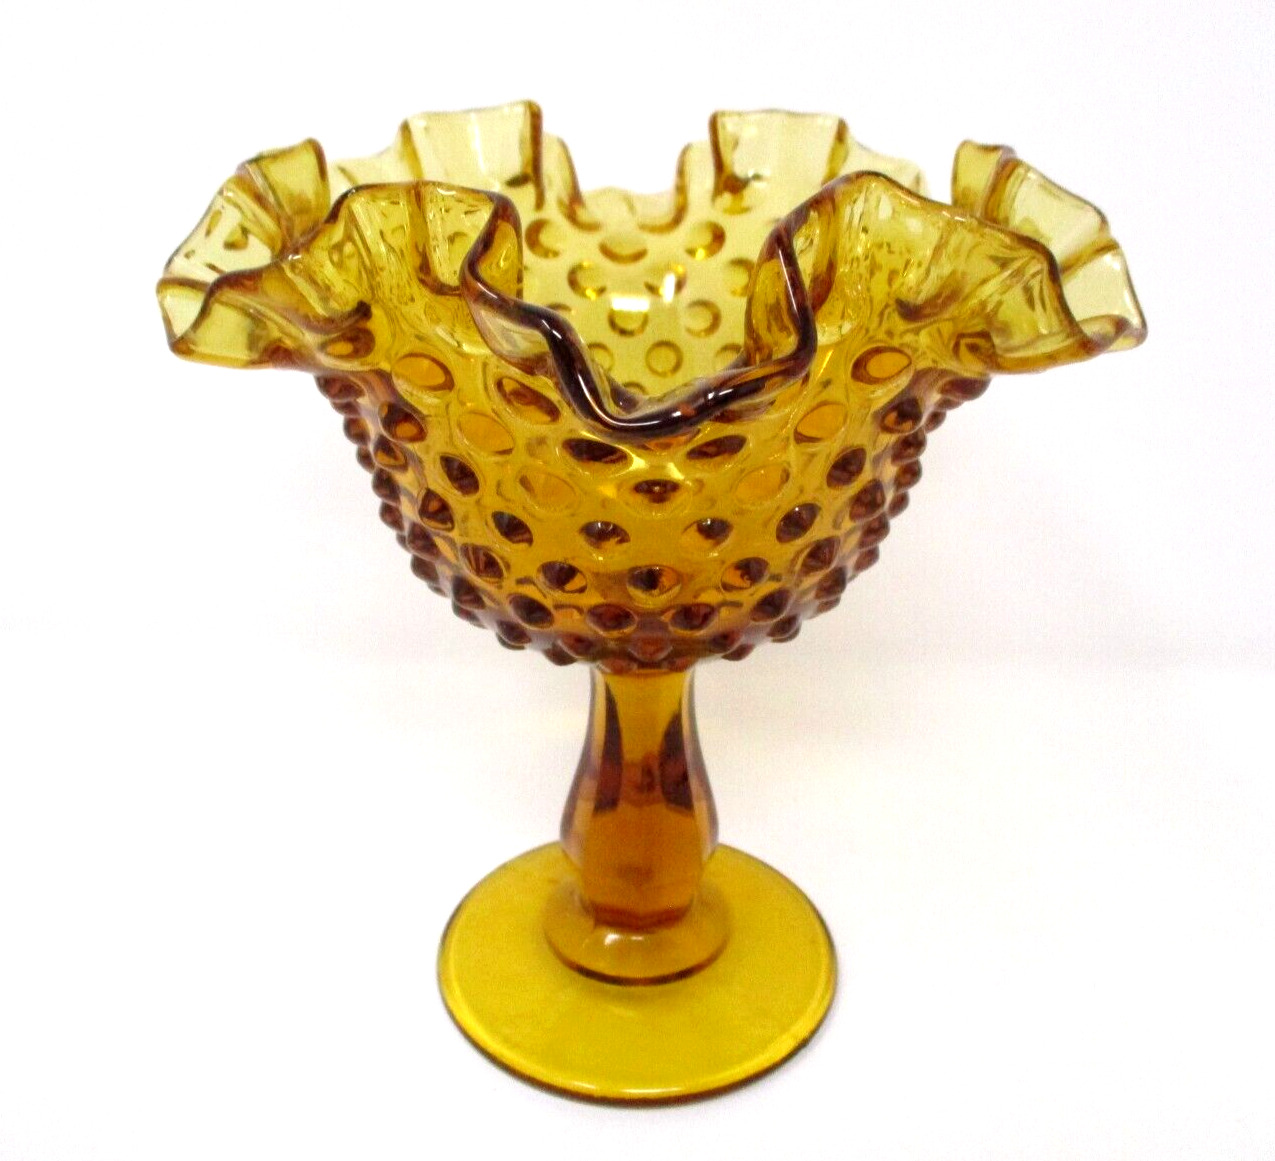 Vintage Amber Glass Hobnail Ruffle Edge Compote Footed Pedestal Bowl Candy Dish